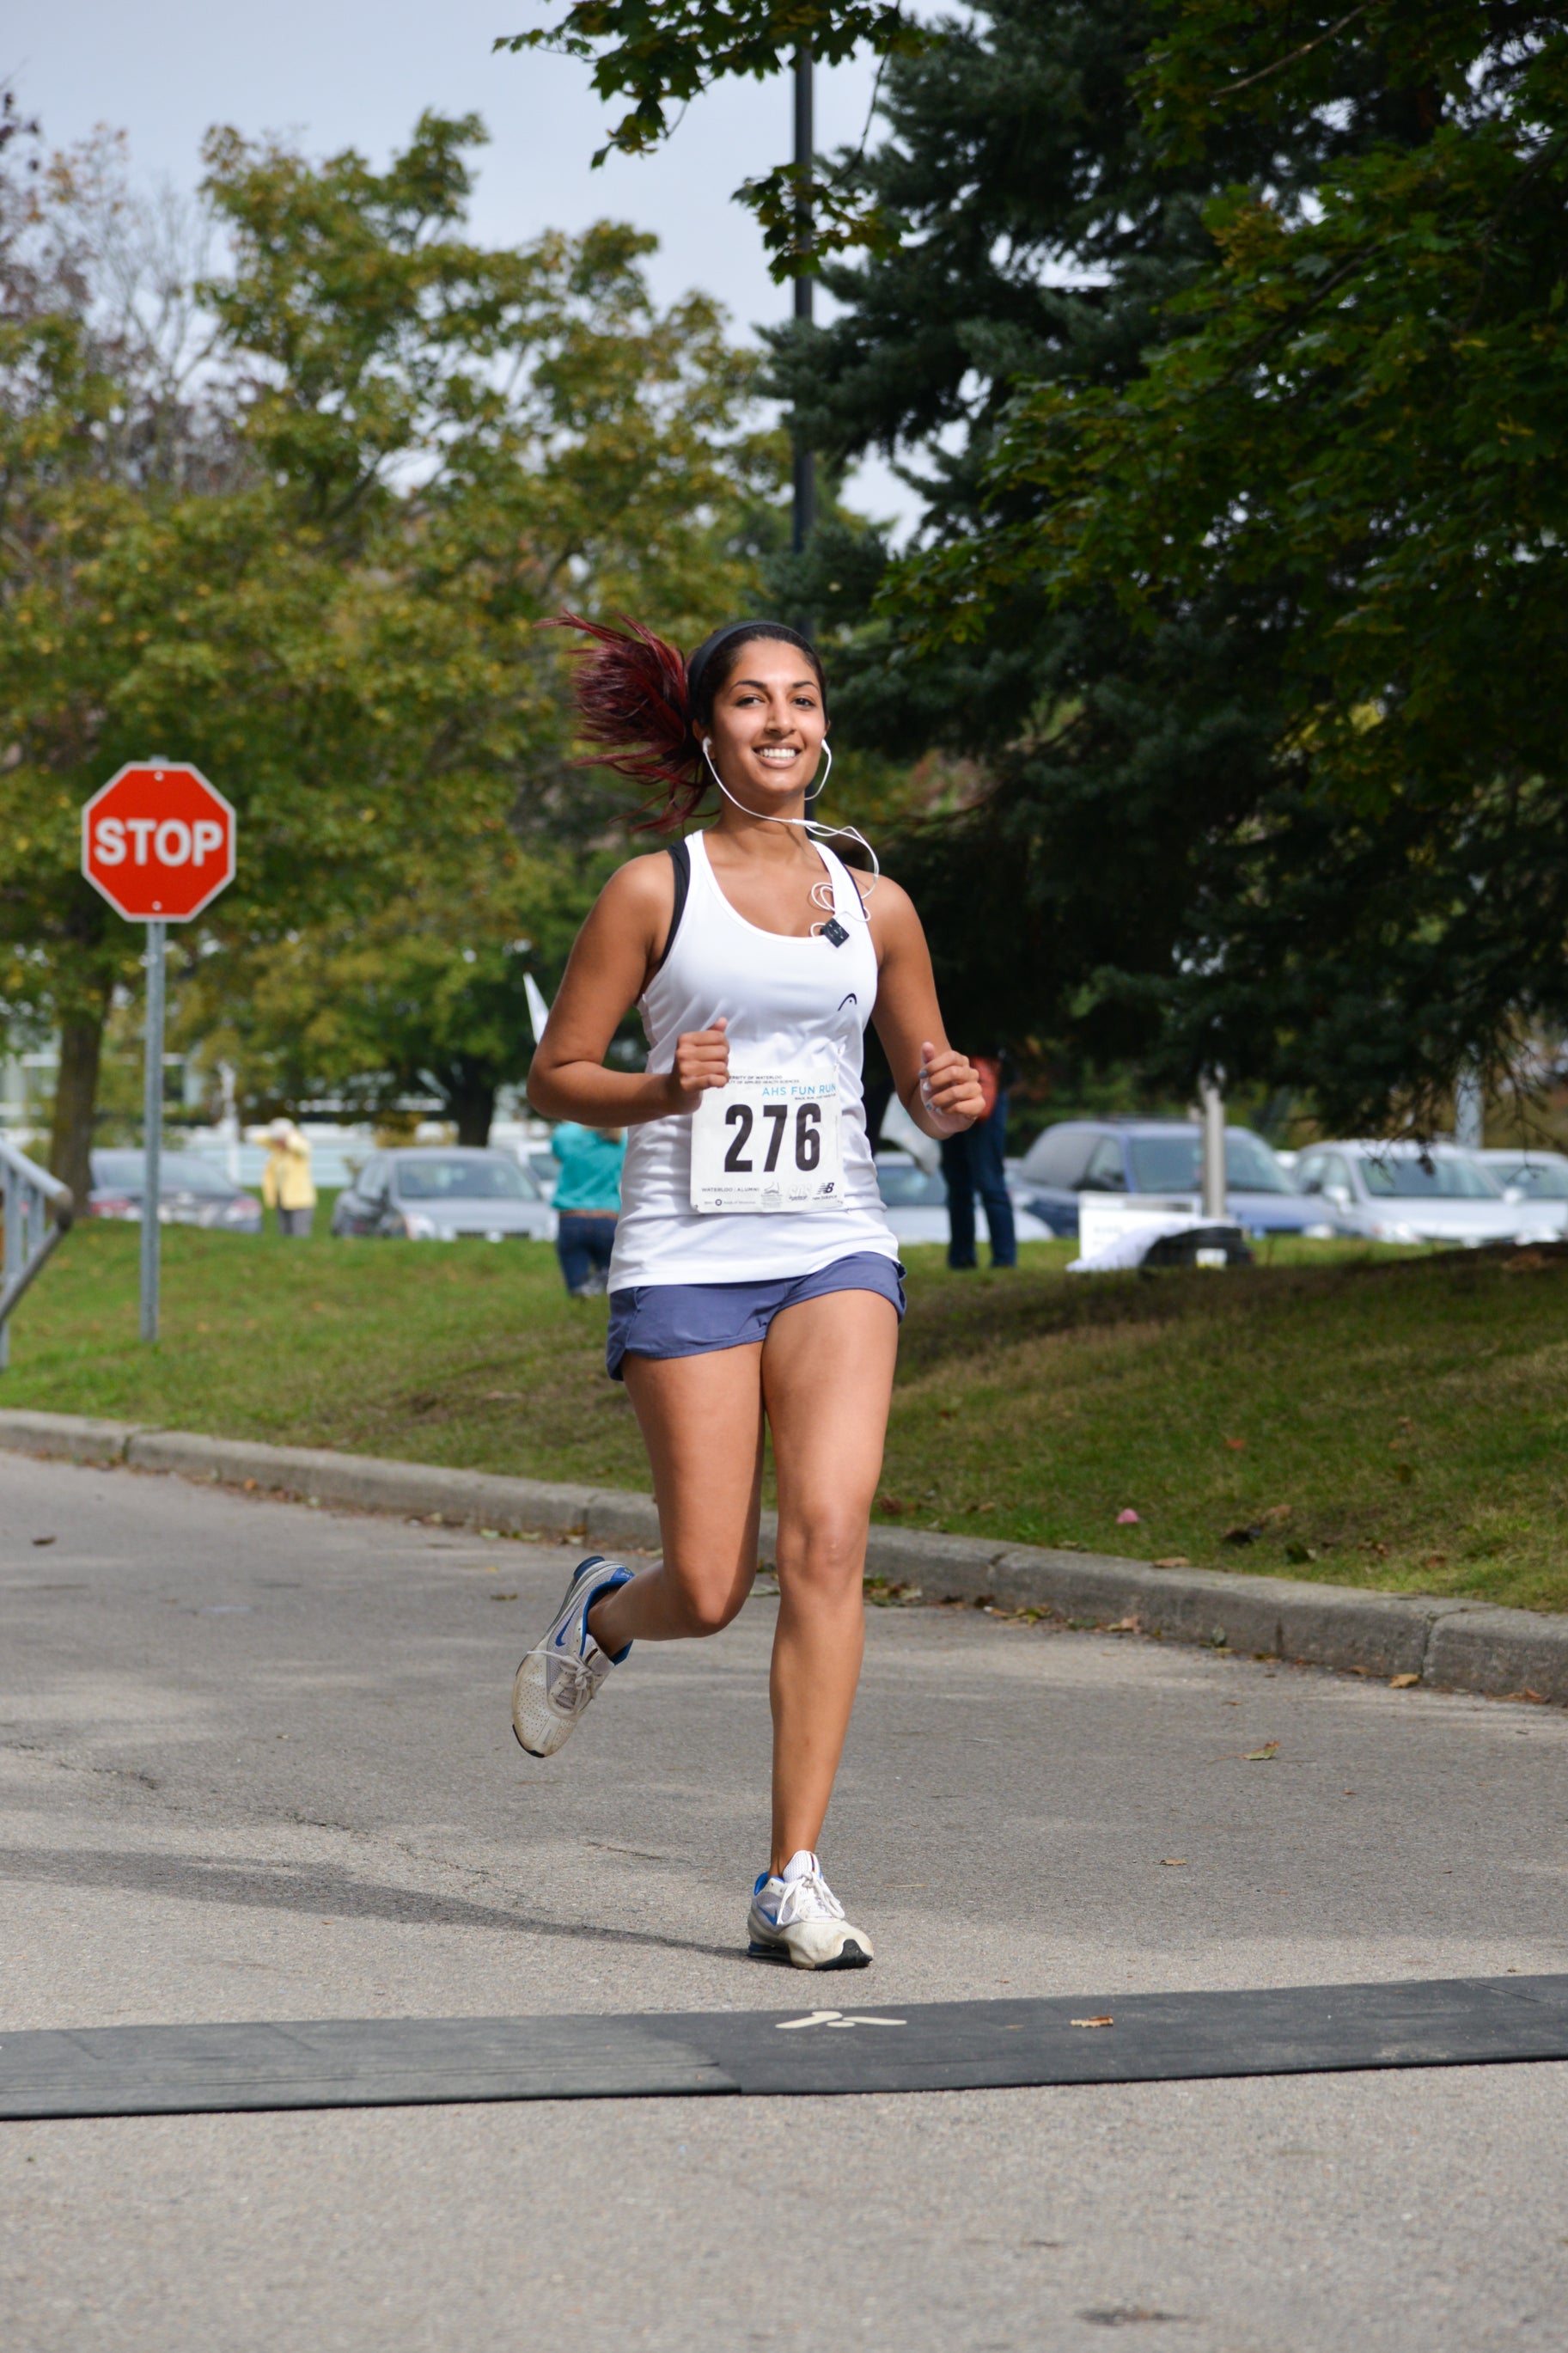 Student running and smiling.